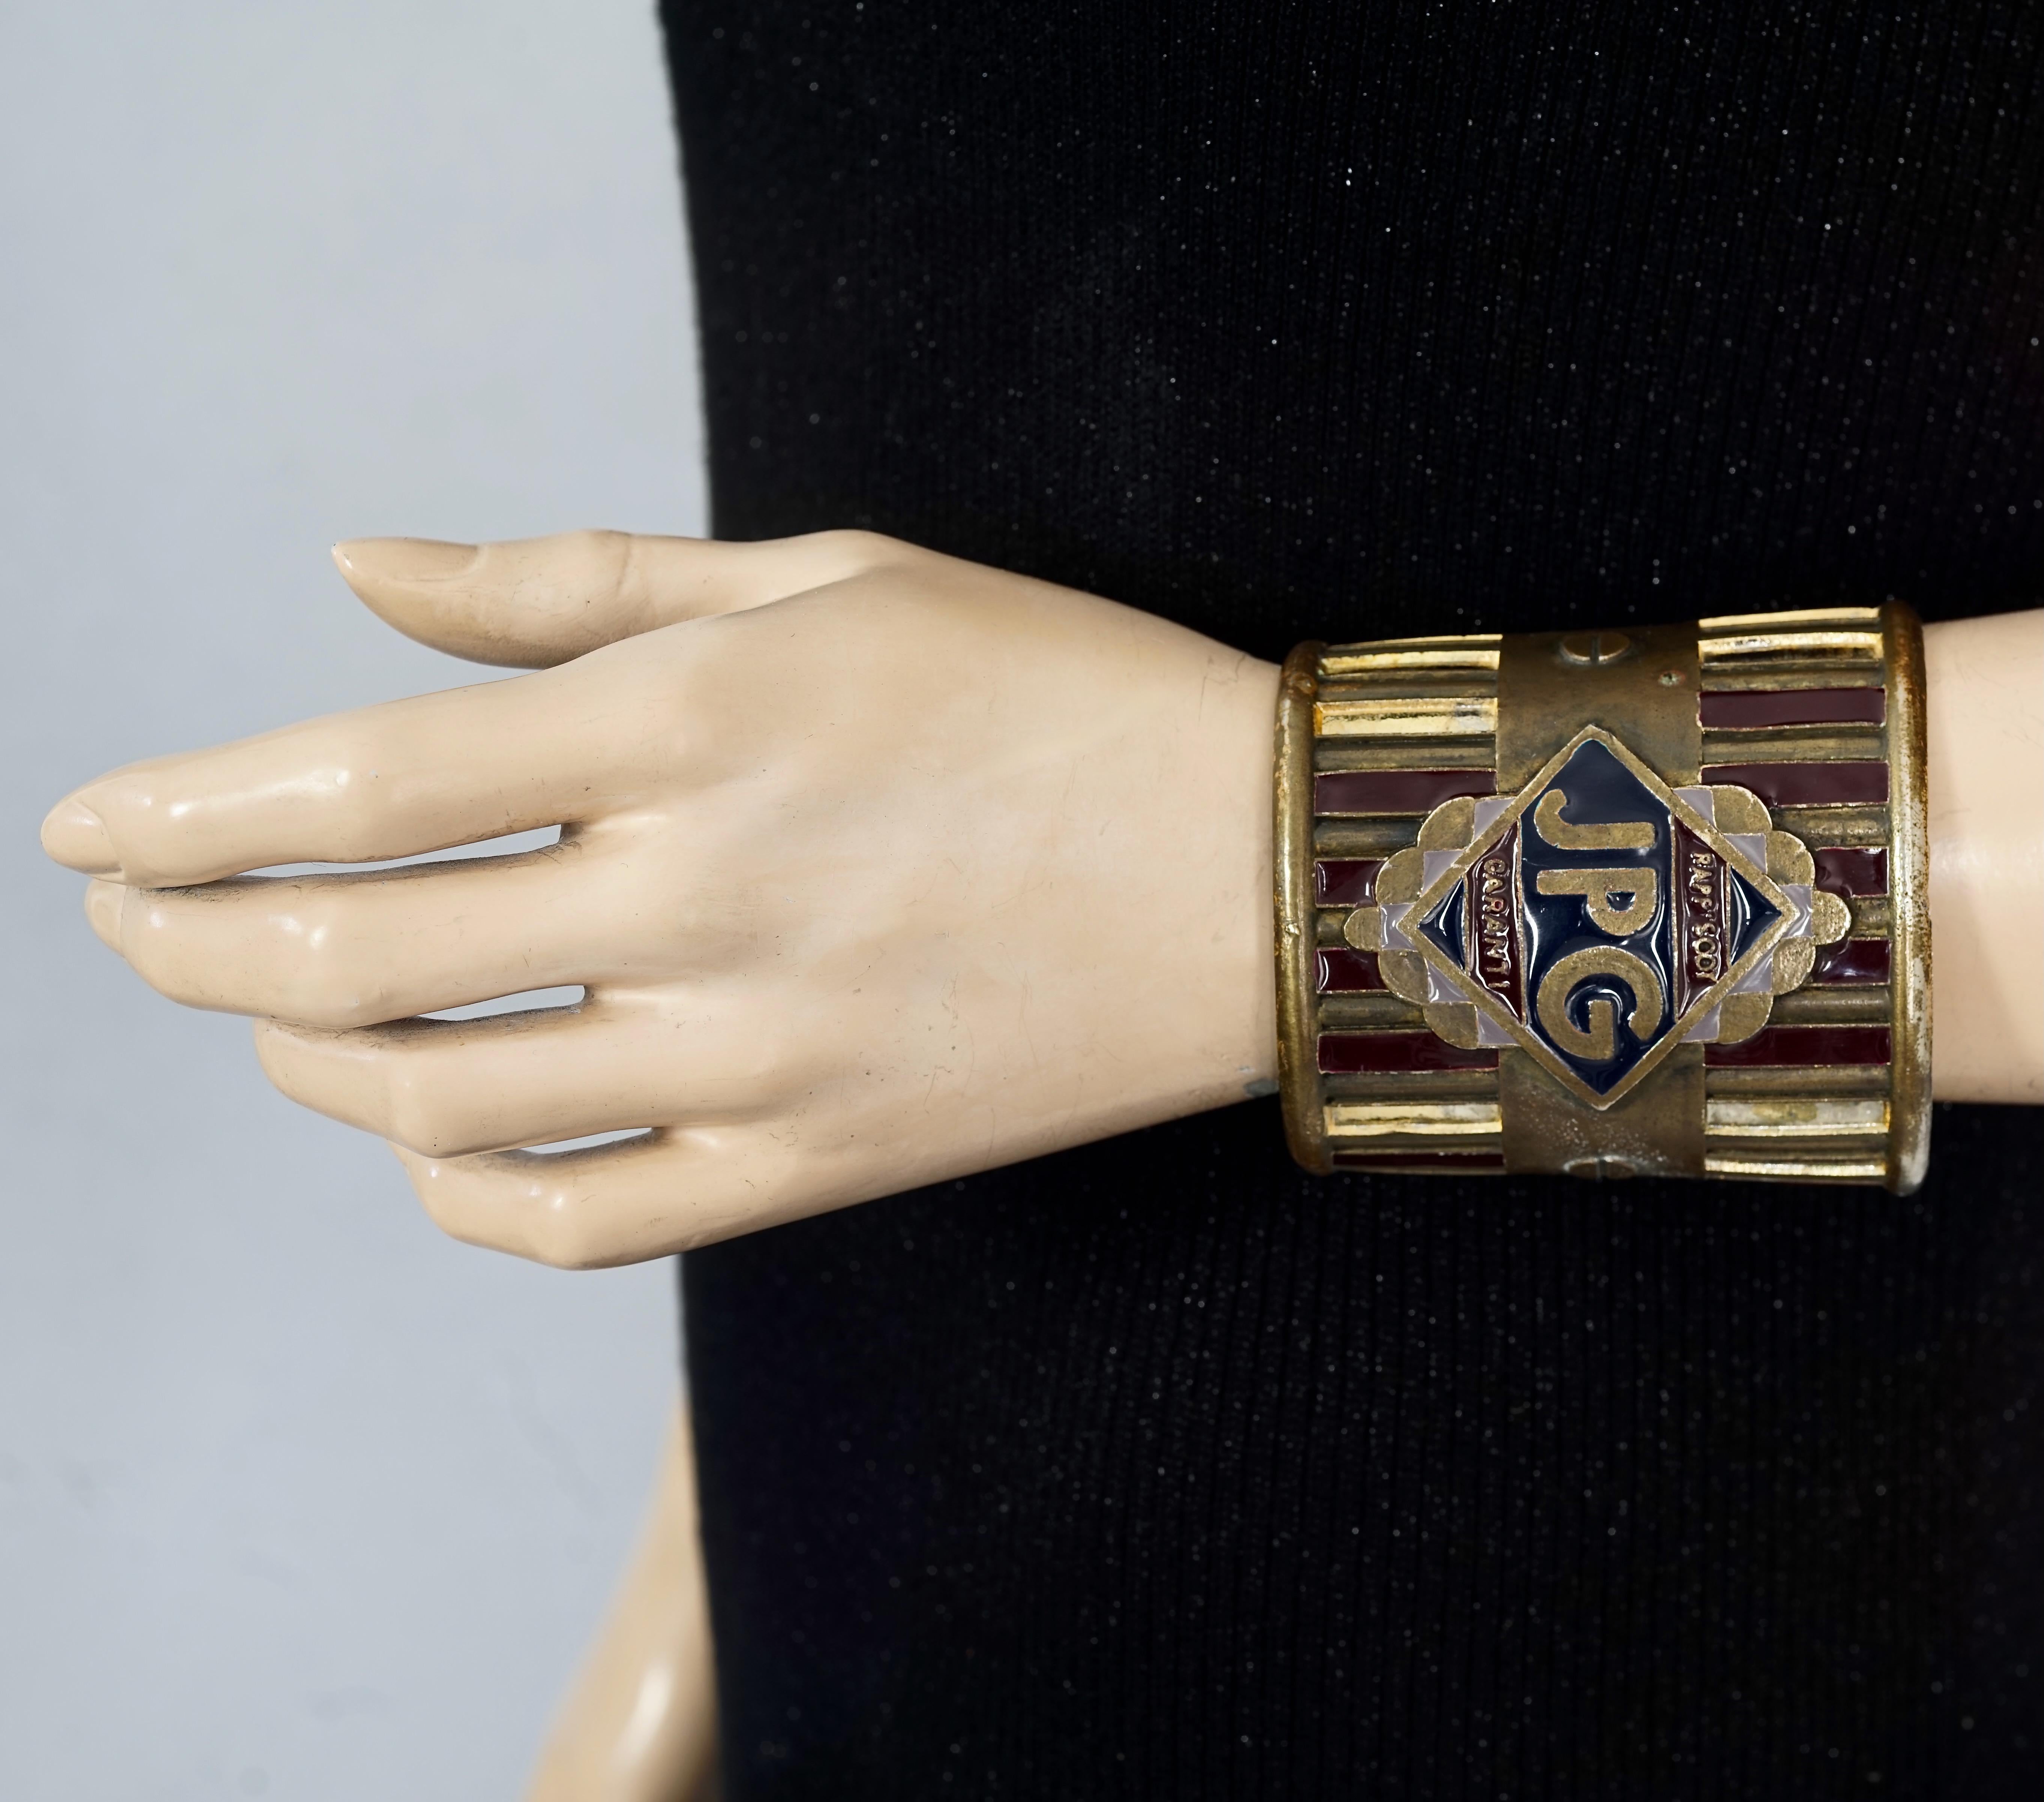 Vintage JEAN PAUL GAULTIER Rapsody Garanti Enamel Rustic Cuff Bracelet

Measurements:
Height: 3.07 inches (7.8 cm)
Inner Circumference: 6.61 inches (16.8 cm) opening included

Features:
- 100% Authentic JEAN PAUL GAULTIER.
- Wide enamel cuff